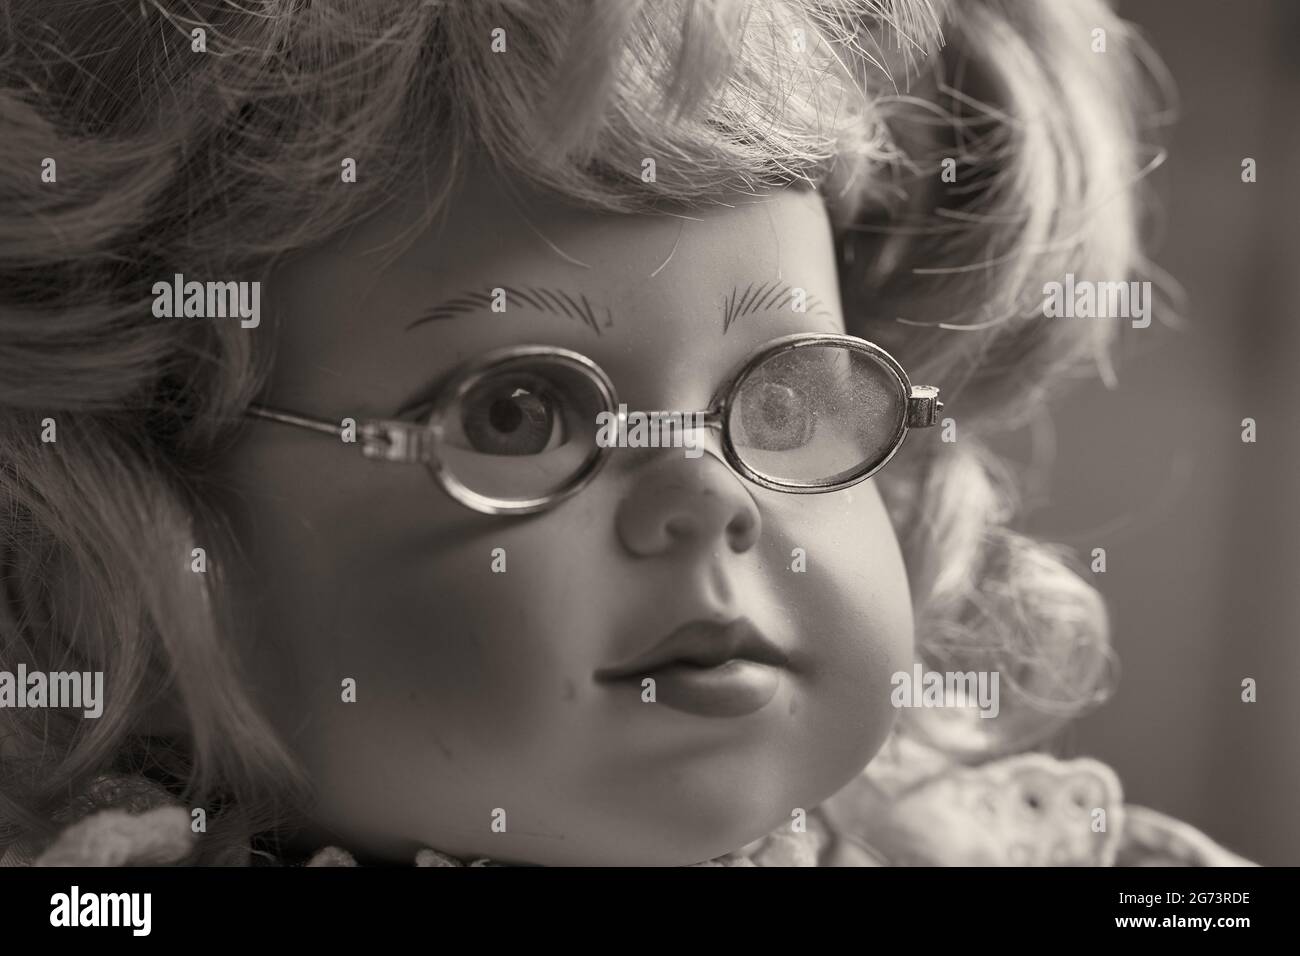 Portrait of a vintage baby doll, a toy girl with blond hair and glasses. Stock Photo